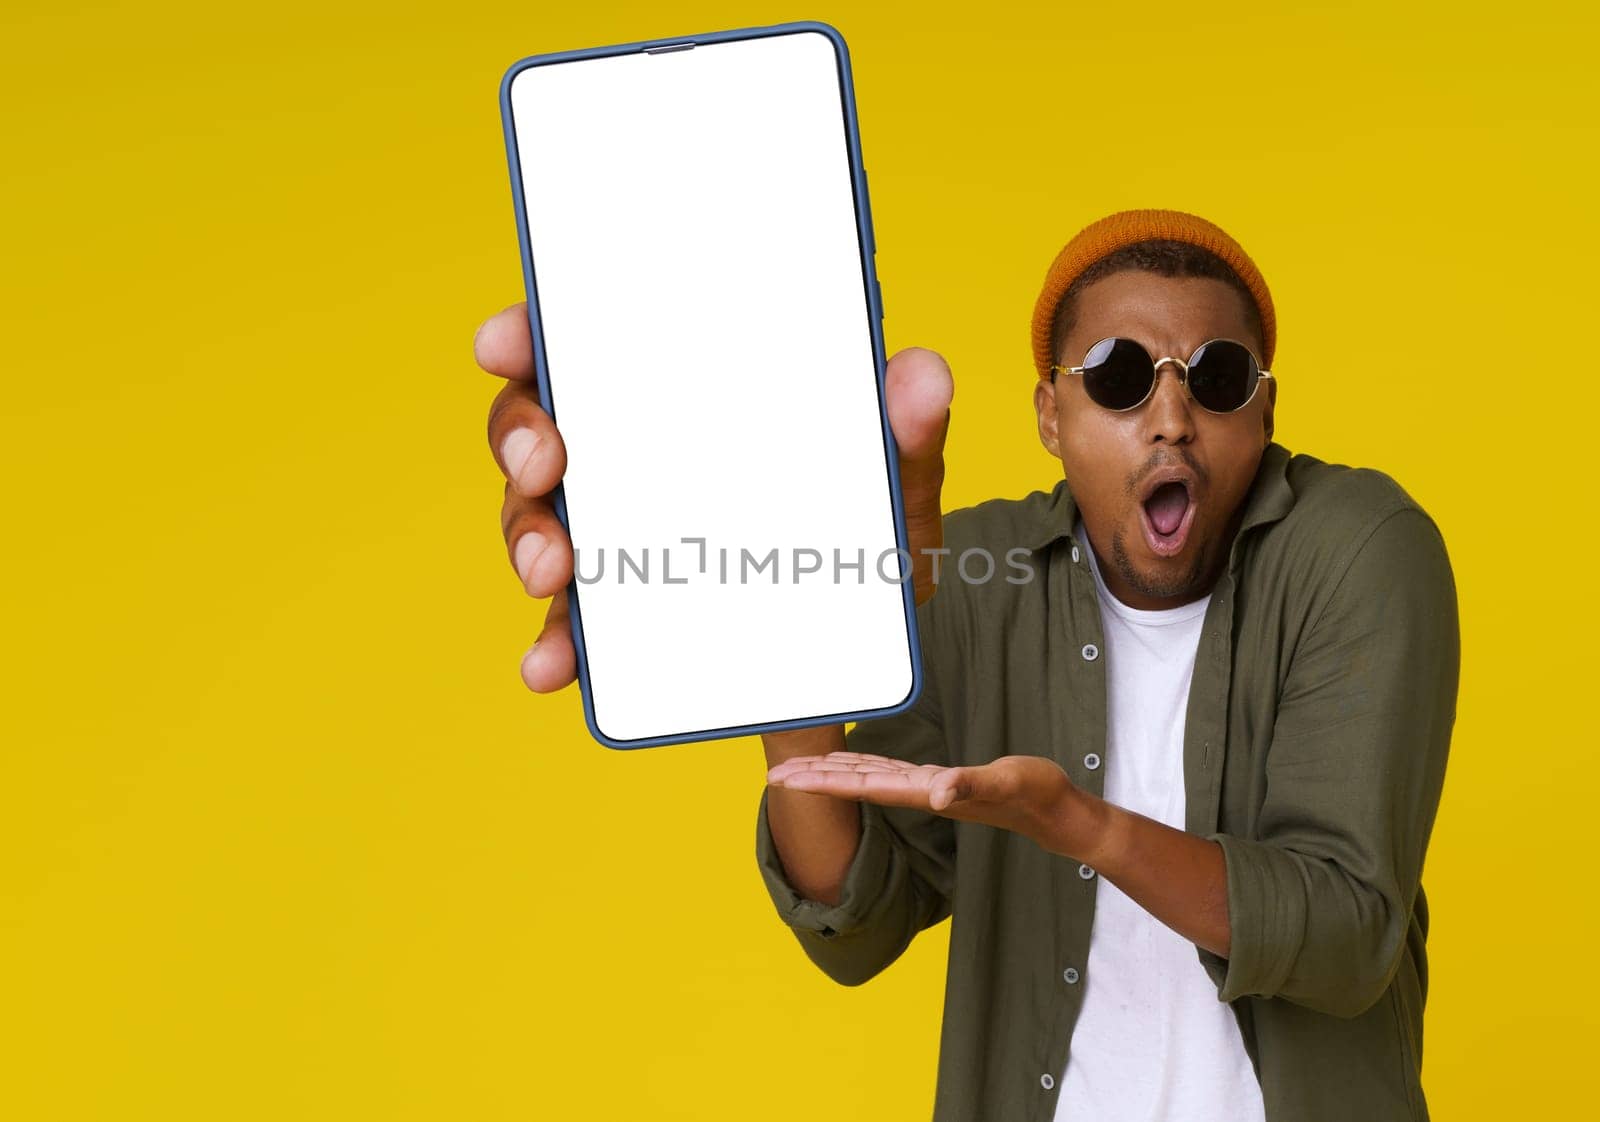 Surprised African man is holding phone with white blank screen against yellow background with copy space. The image is ideal for advertising concepts. High quality photo